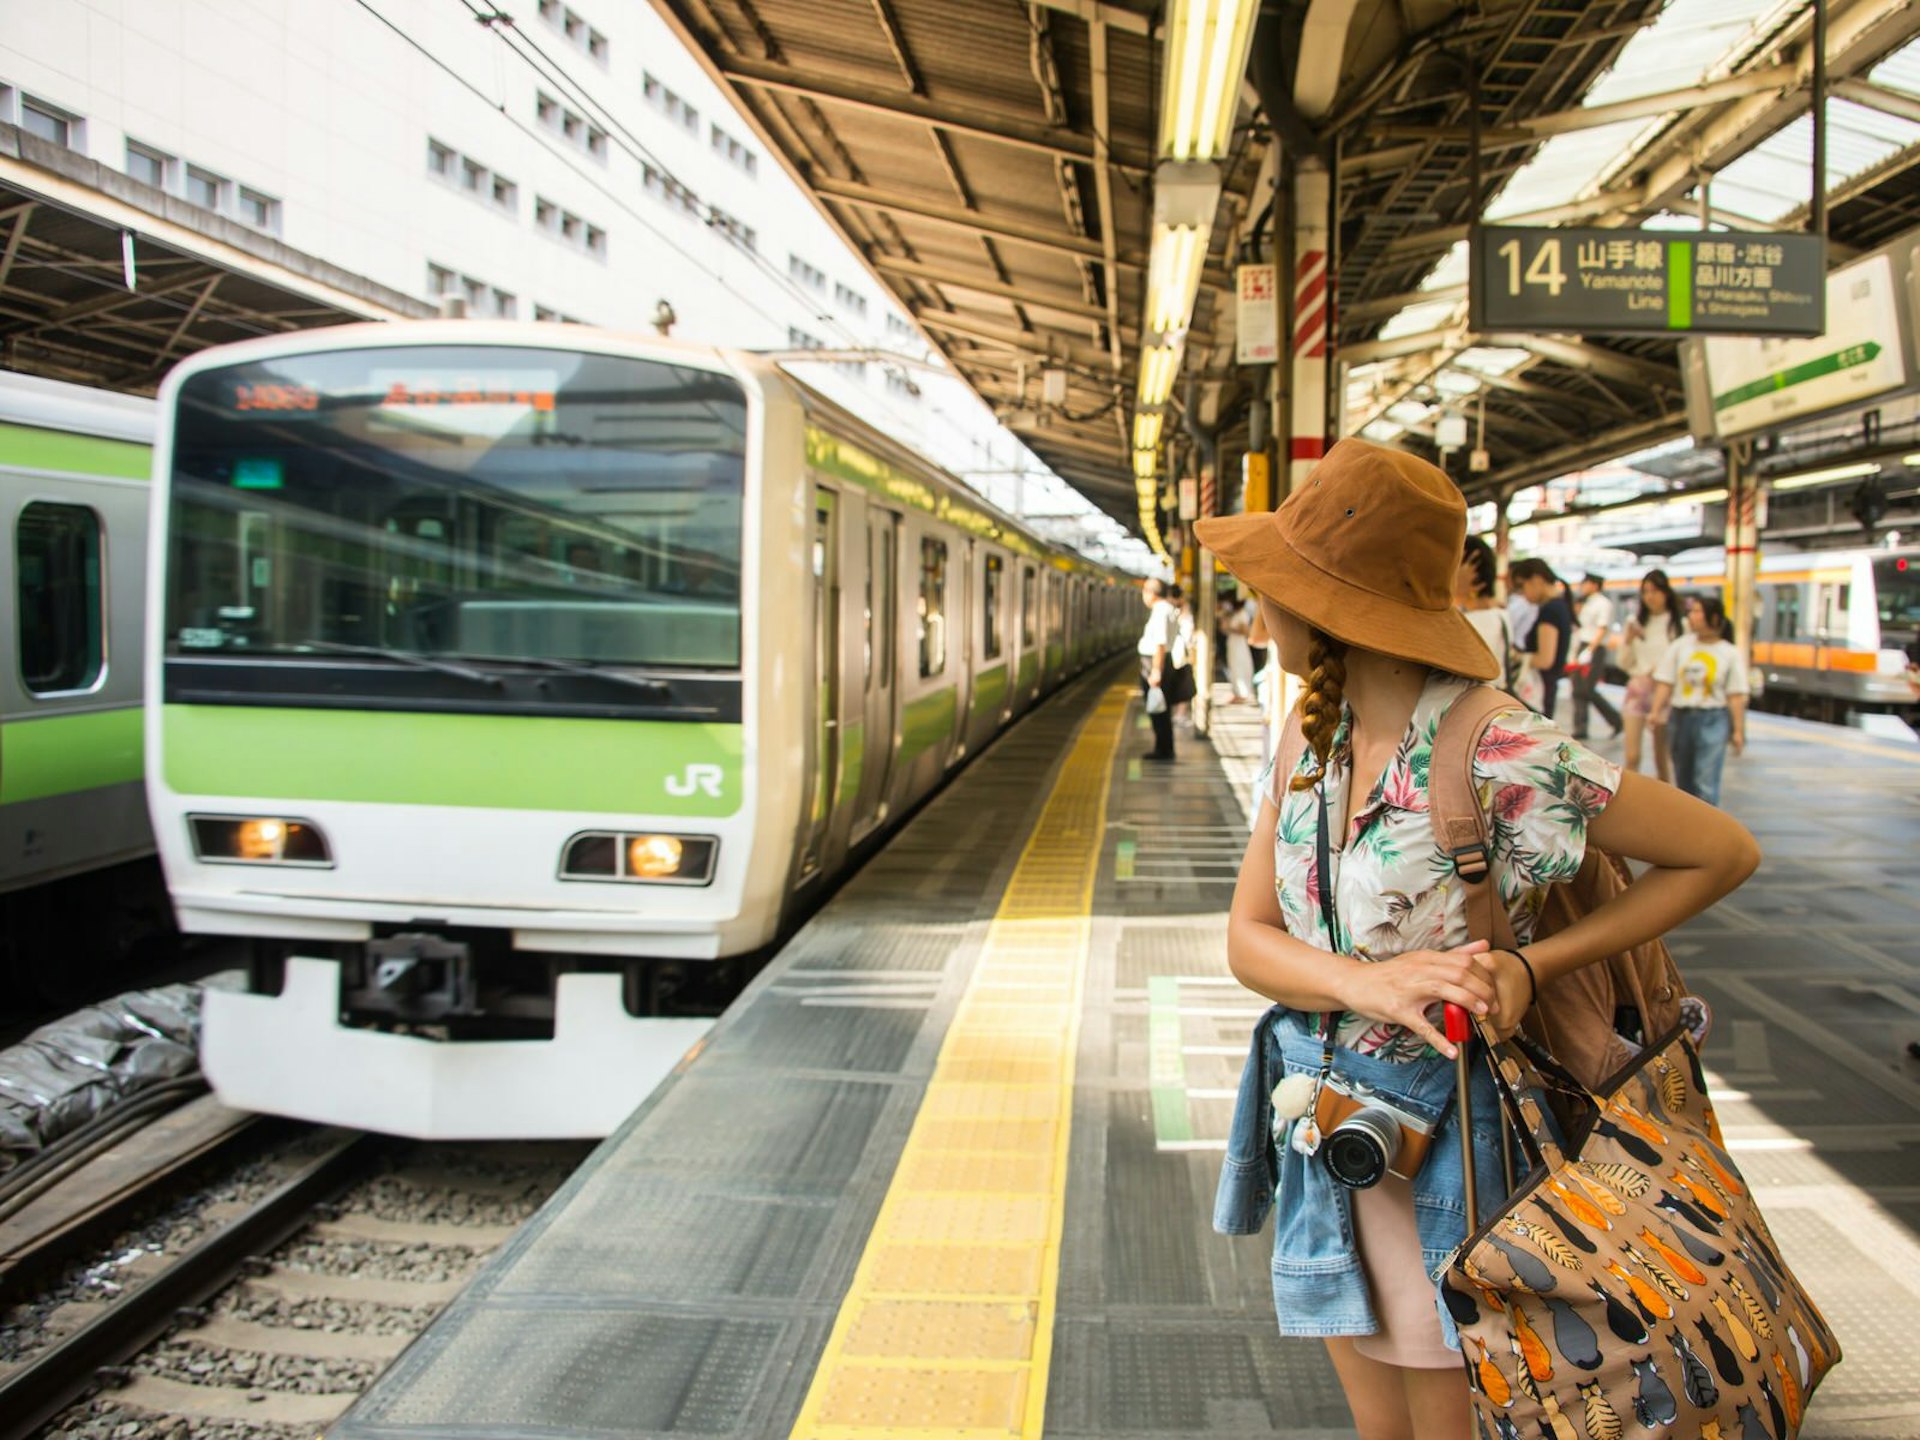 A Yamanote Line train pulls up to a station platform as a tourist with bag and camera waits to board © Vassamon Anansukkasem / Shutterstock